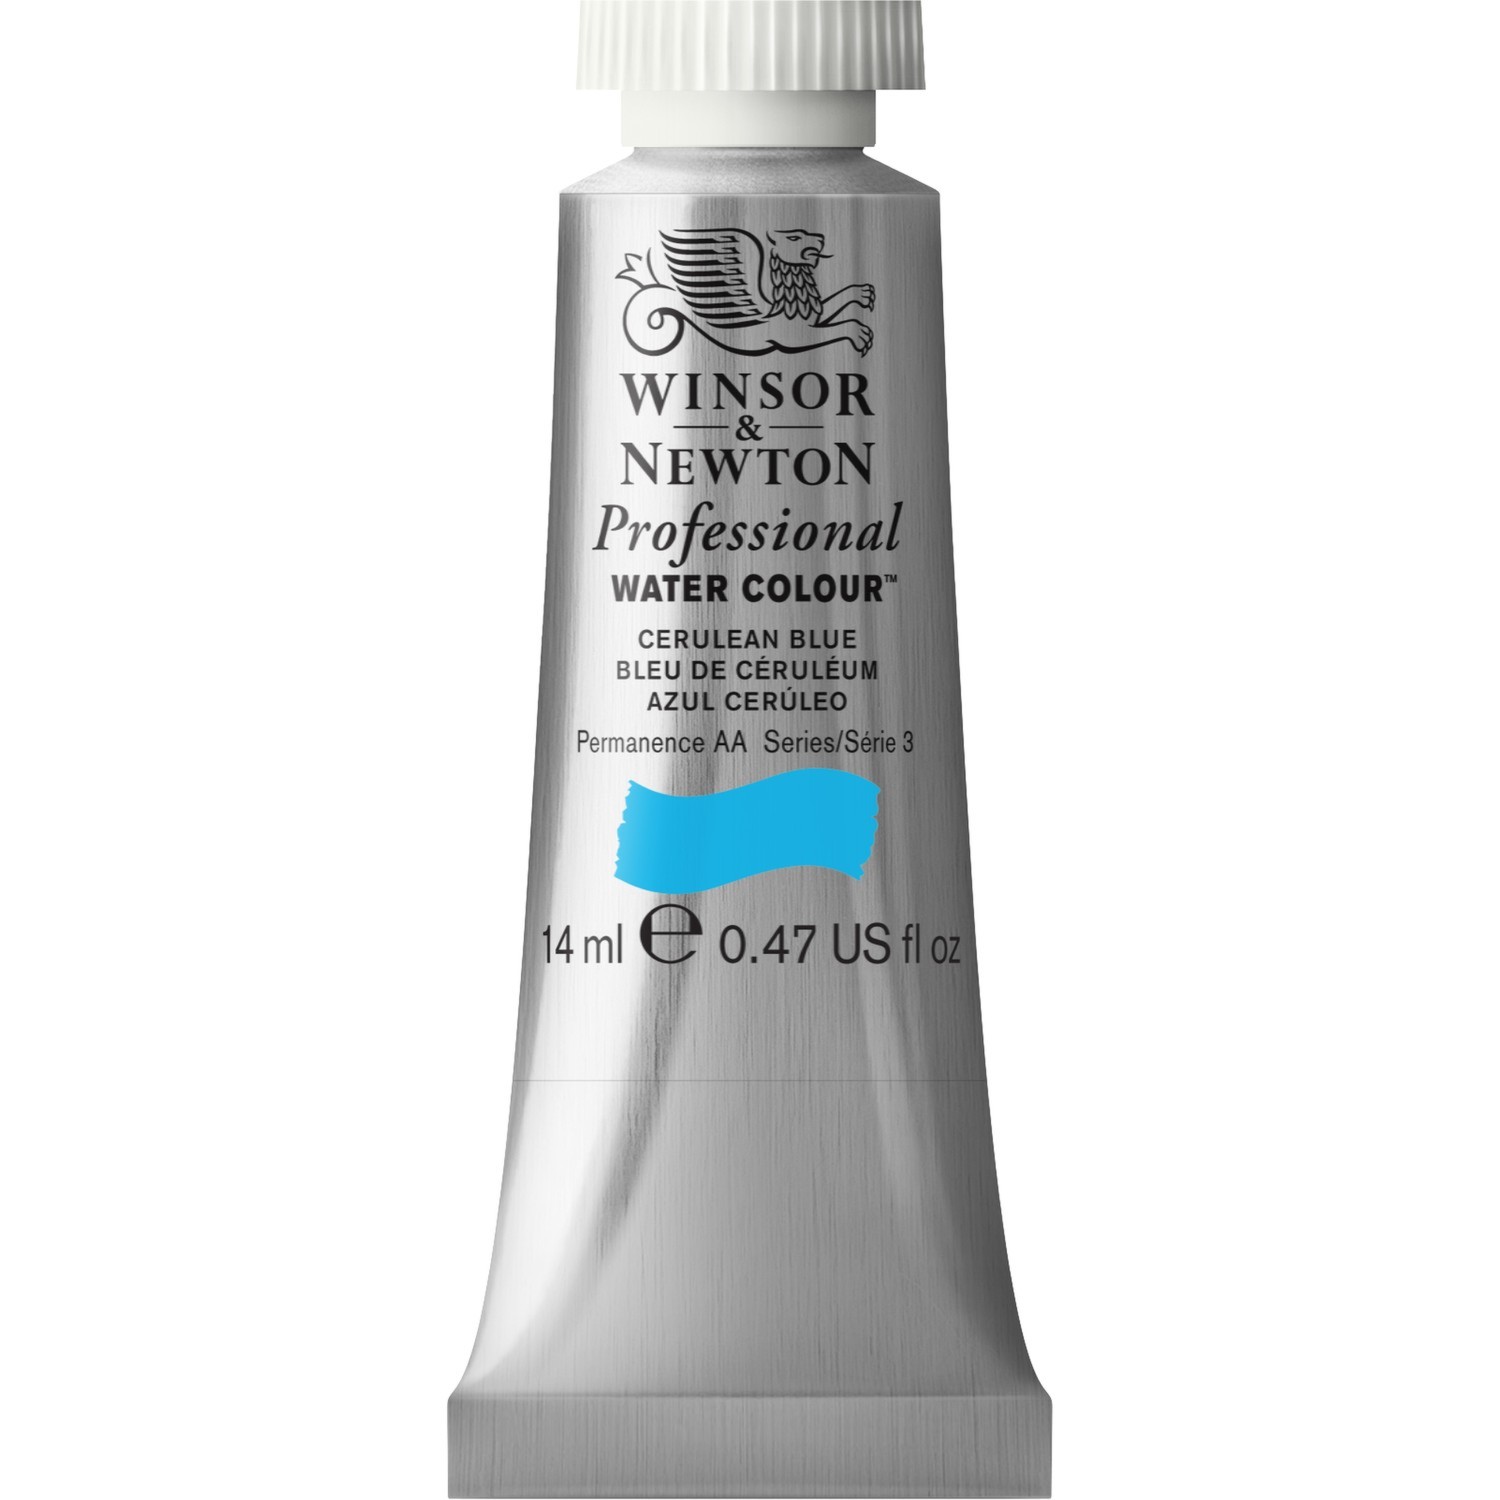 Winsor and Newton 14ml Professional Watercolour Paint - Cerulean Blue Image